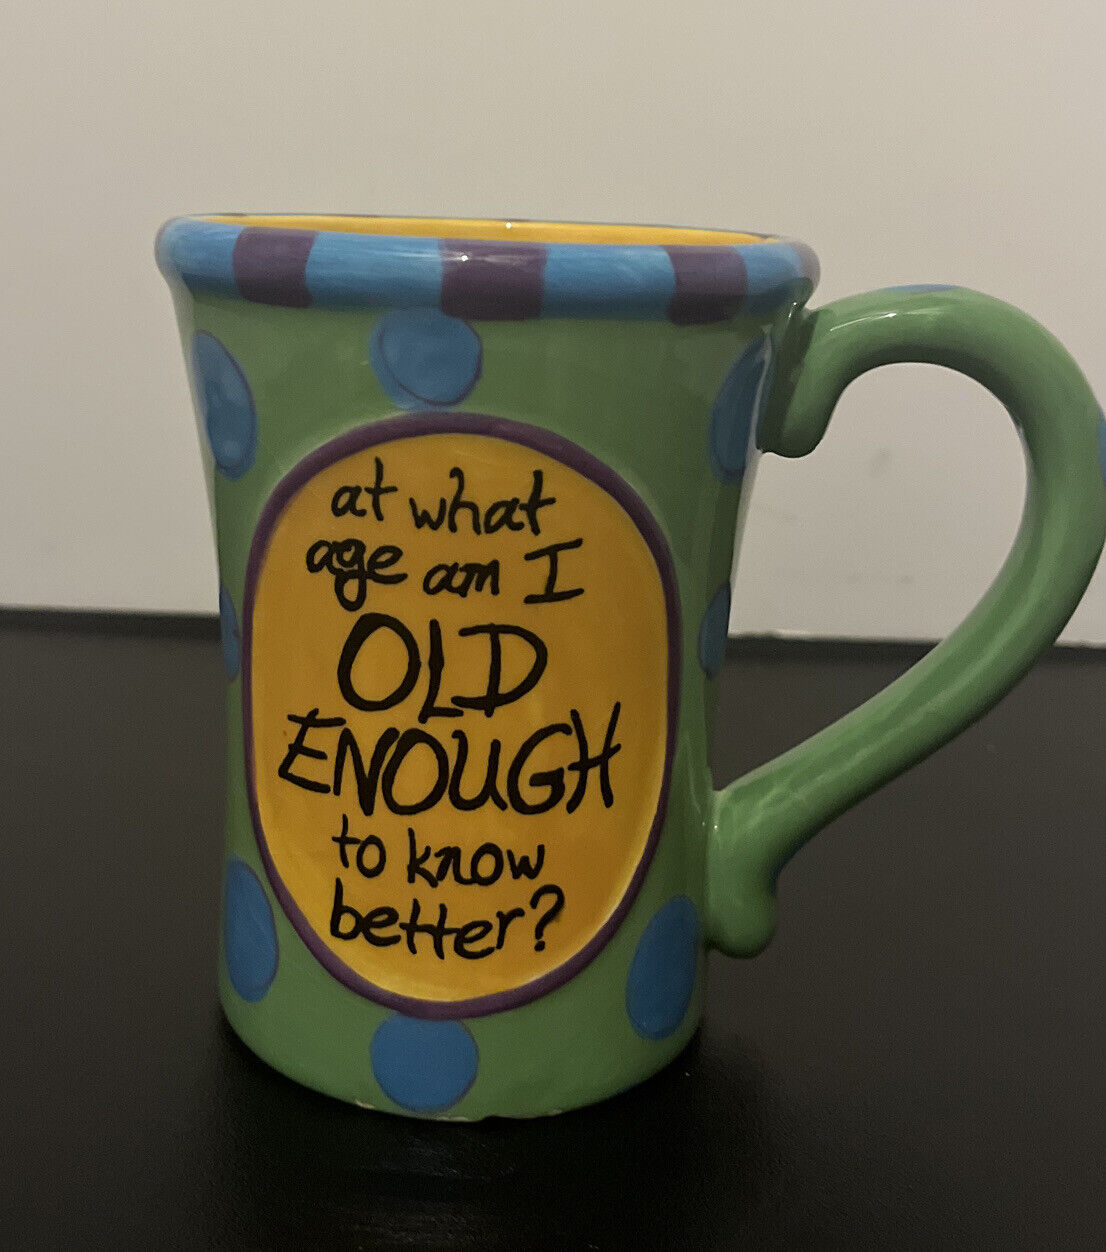 Burton + Burton At what age am I old enough to know better coffee mug 2009 as is